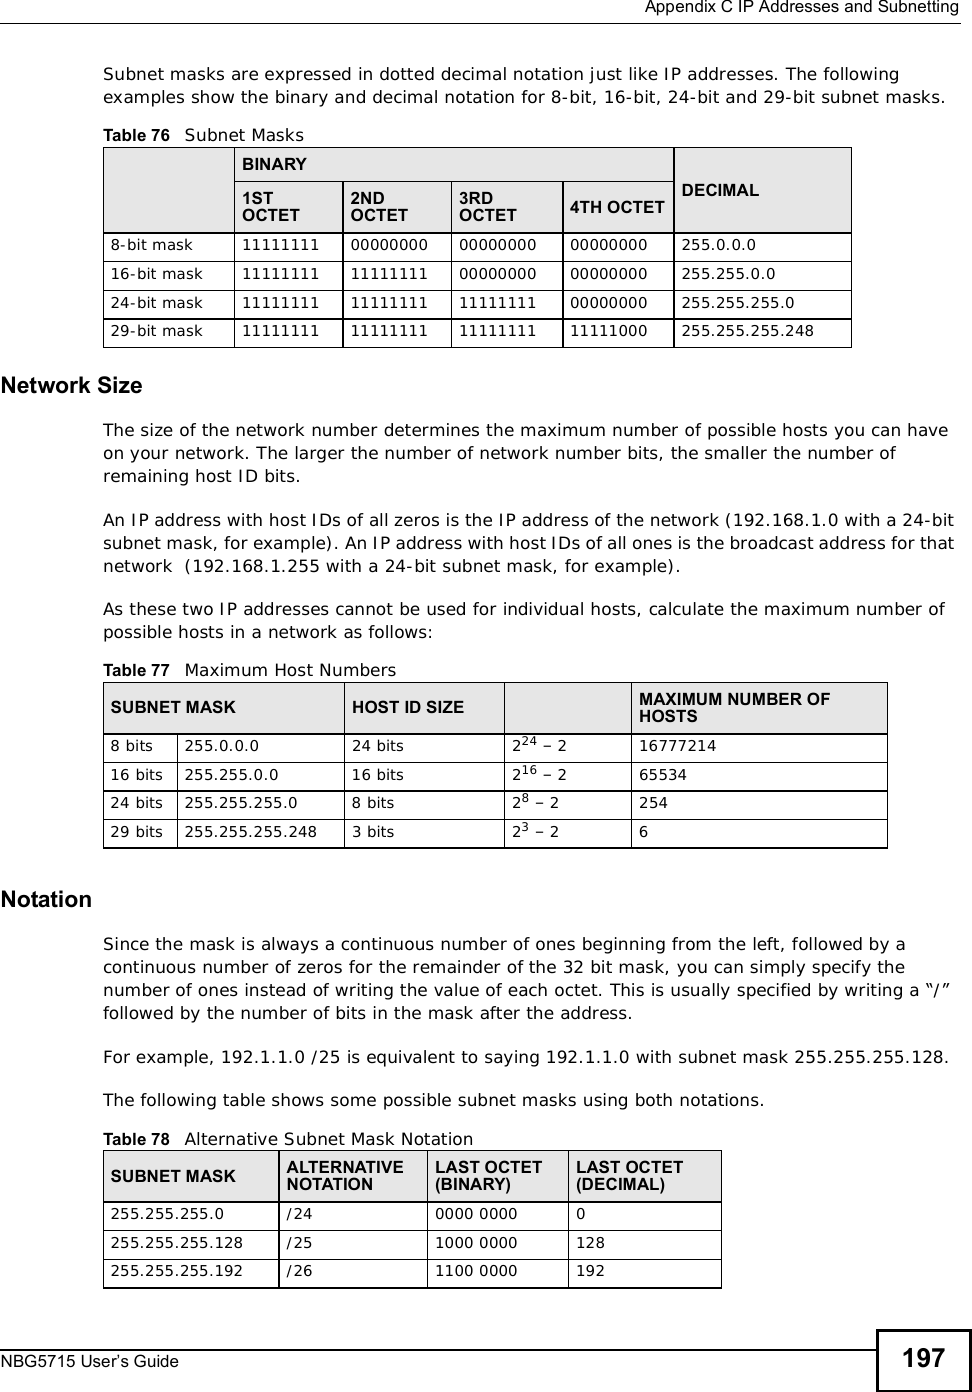  Appendix CIP Addresses and SubnettingNBG5715 User’s Guide 197Subnet masks are expressed in dotted decimal notation just like IP addresses. The following examples show the binary and decimal notation for 8-bit, 16-bit, 24-bit and 29-bit subnet masks. Network SizeThe size of the network number determines the maximum number of possible hosts you can have on your network. The larger the number of network number bits, the smaller the number of remaining host ID bits. An IP address with host IDs of all zeros is the IP address of the network (192.168.1.0 with a 24-bit subnet mask, for example). An IP address with host IDs of all ones is the broadcast address for that network  (192.168.1.255 with a 24-bit subnet mask, for example).As these two IP addresses cannot be used for individual hosts, calculate the maximum number of possible hosts in a network as follows:NotationSince the mask is always a continuous number of ones beginning from the left, followed by a continuous number of zeros for the remainder of the 32 bit mask, you can simply specify the number of ones instead of writing the value of each octet. This is usually specified by writing a “/” followed by the number of bits in the mask after the address. For example, 192.1.1.0 /25 is equivalent to saying 192.1.1.0 with subnet mask 255.255.255.128. The following table shows some possible subnet masks using both notations. Table 76   Subnet MasksBINARYDECIMAL1STOCTET2NDOCTET3RDOCTET 4TH OCTET8-bit mask 11111111 00000000 00000000 00000000 255.0.0.016-bit mask 11111111 11111111 00000000 00000000 255.255.0.024-bit mask 11111111 11111111 11111111 00000000 255.255.255.029-bit mask 11111111 11111111 11111111 11111000 255.255.255.248Table 77   Maximum Host NumbersSUBNET MASK HOST ID SIZE MAXIMUM NUMBER OF HOSTS8 bits255.0.0.024 bits224 – 21677721416 bits255.255.0.016 bits216 – 26553424 bits255.255.255.08 bits28 – 225429 bits255.255.255.2483 bits23 – 26Table 78   Alternative Subnet Mask NotationSUBNET MASK ALTERNATIVE NOTATIONLAST OCTET (BINARY)LAST OCTET (DECIMAL)255.255.255.0 /24 0000 0000 0255.255.255.128 /25 1000 0000 128255.255.255.192 /26 1100 0000 192